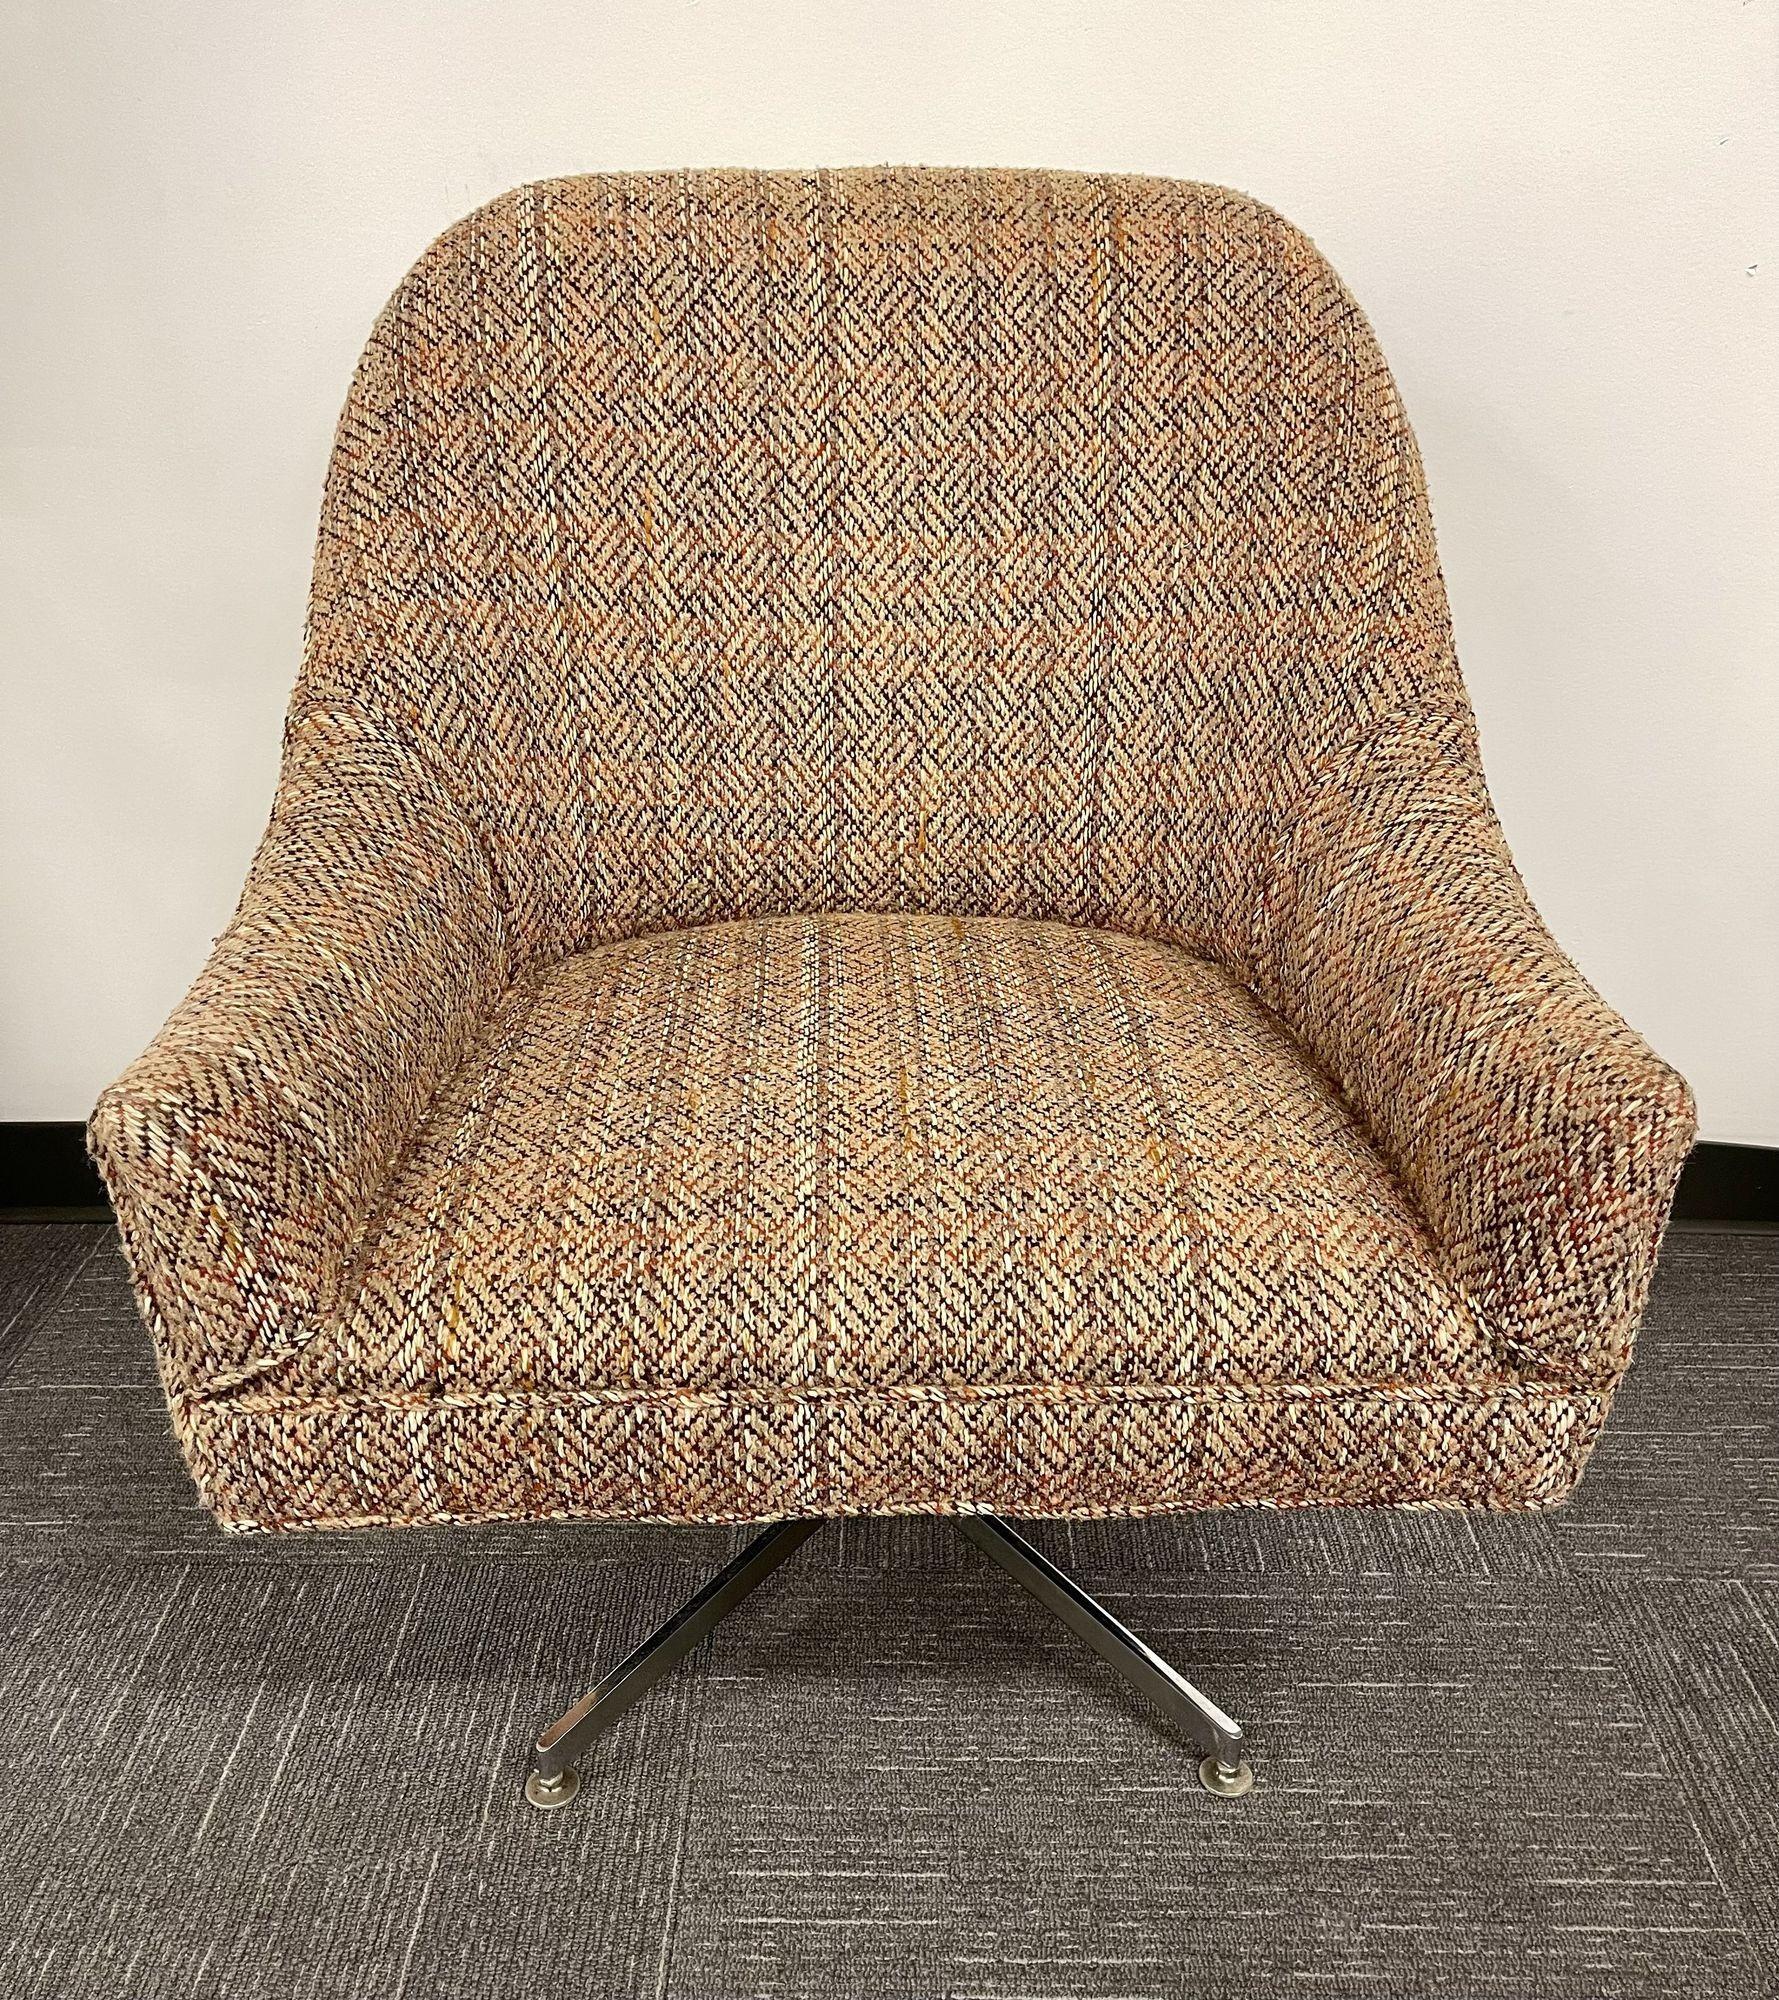 Mid-Century Modern swivel tweed lounge chair, office chair,
 
A fine custom quality Mid-Century Modern swivel chair in a loverly tweed upholstery. The X form base having a moving center column supporting a tweed covered lounge or office chair. 
